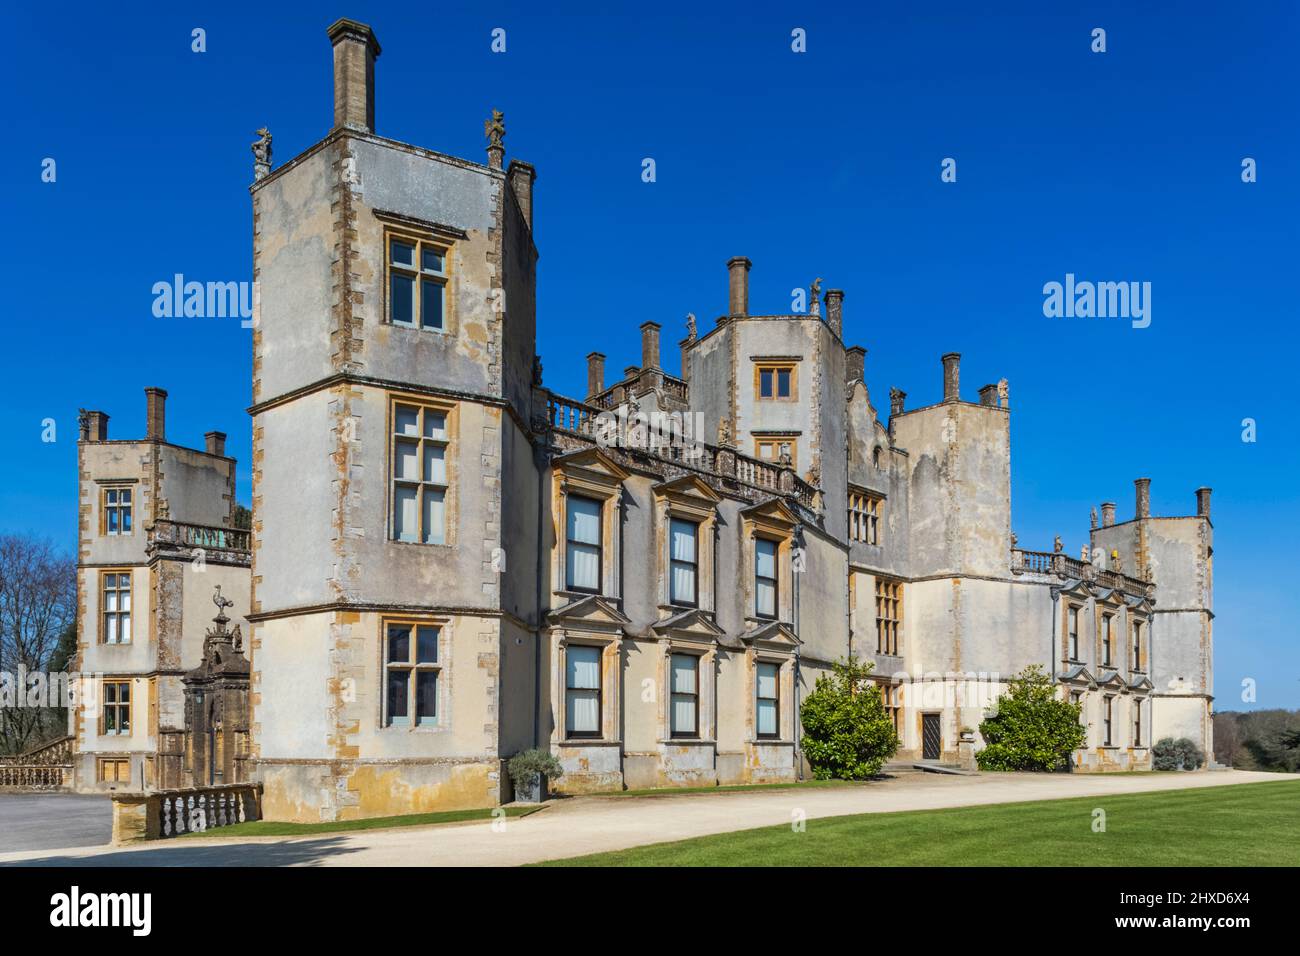 England, Dorset, Sherborne, Sherborne Castle a 16th century Tudor Mansion built by Sir Walter Raleigh in 1594 Stock Photo